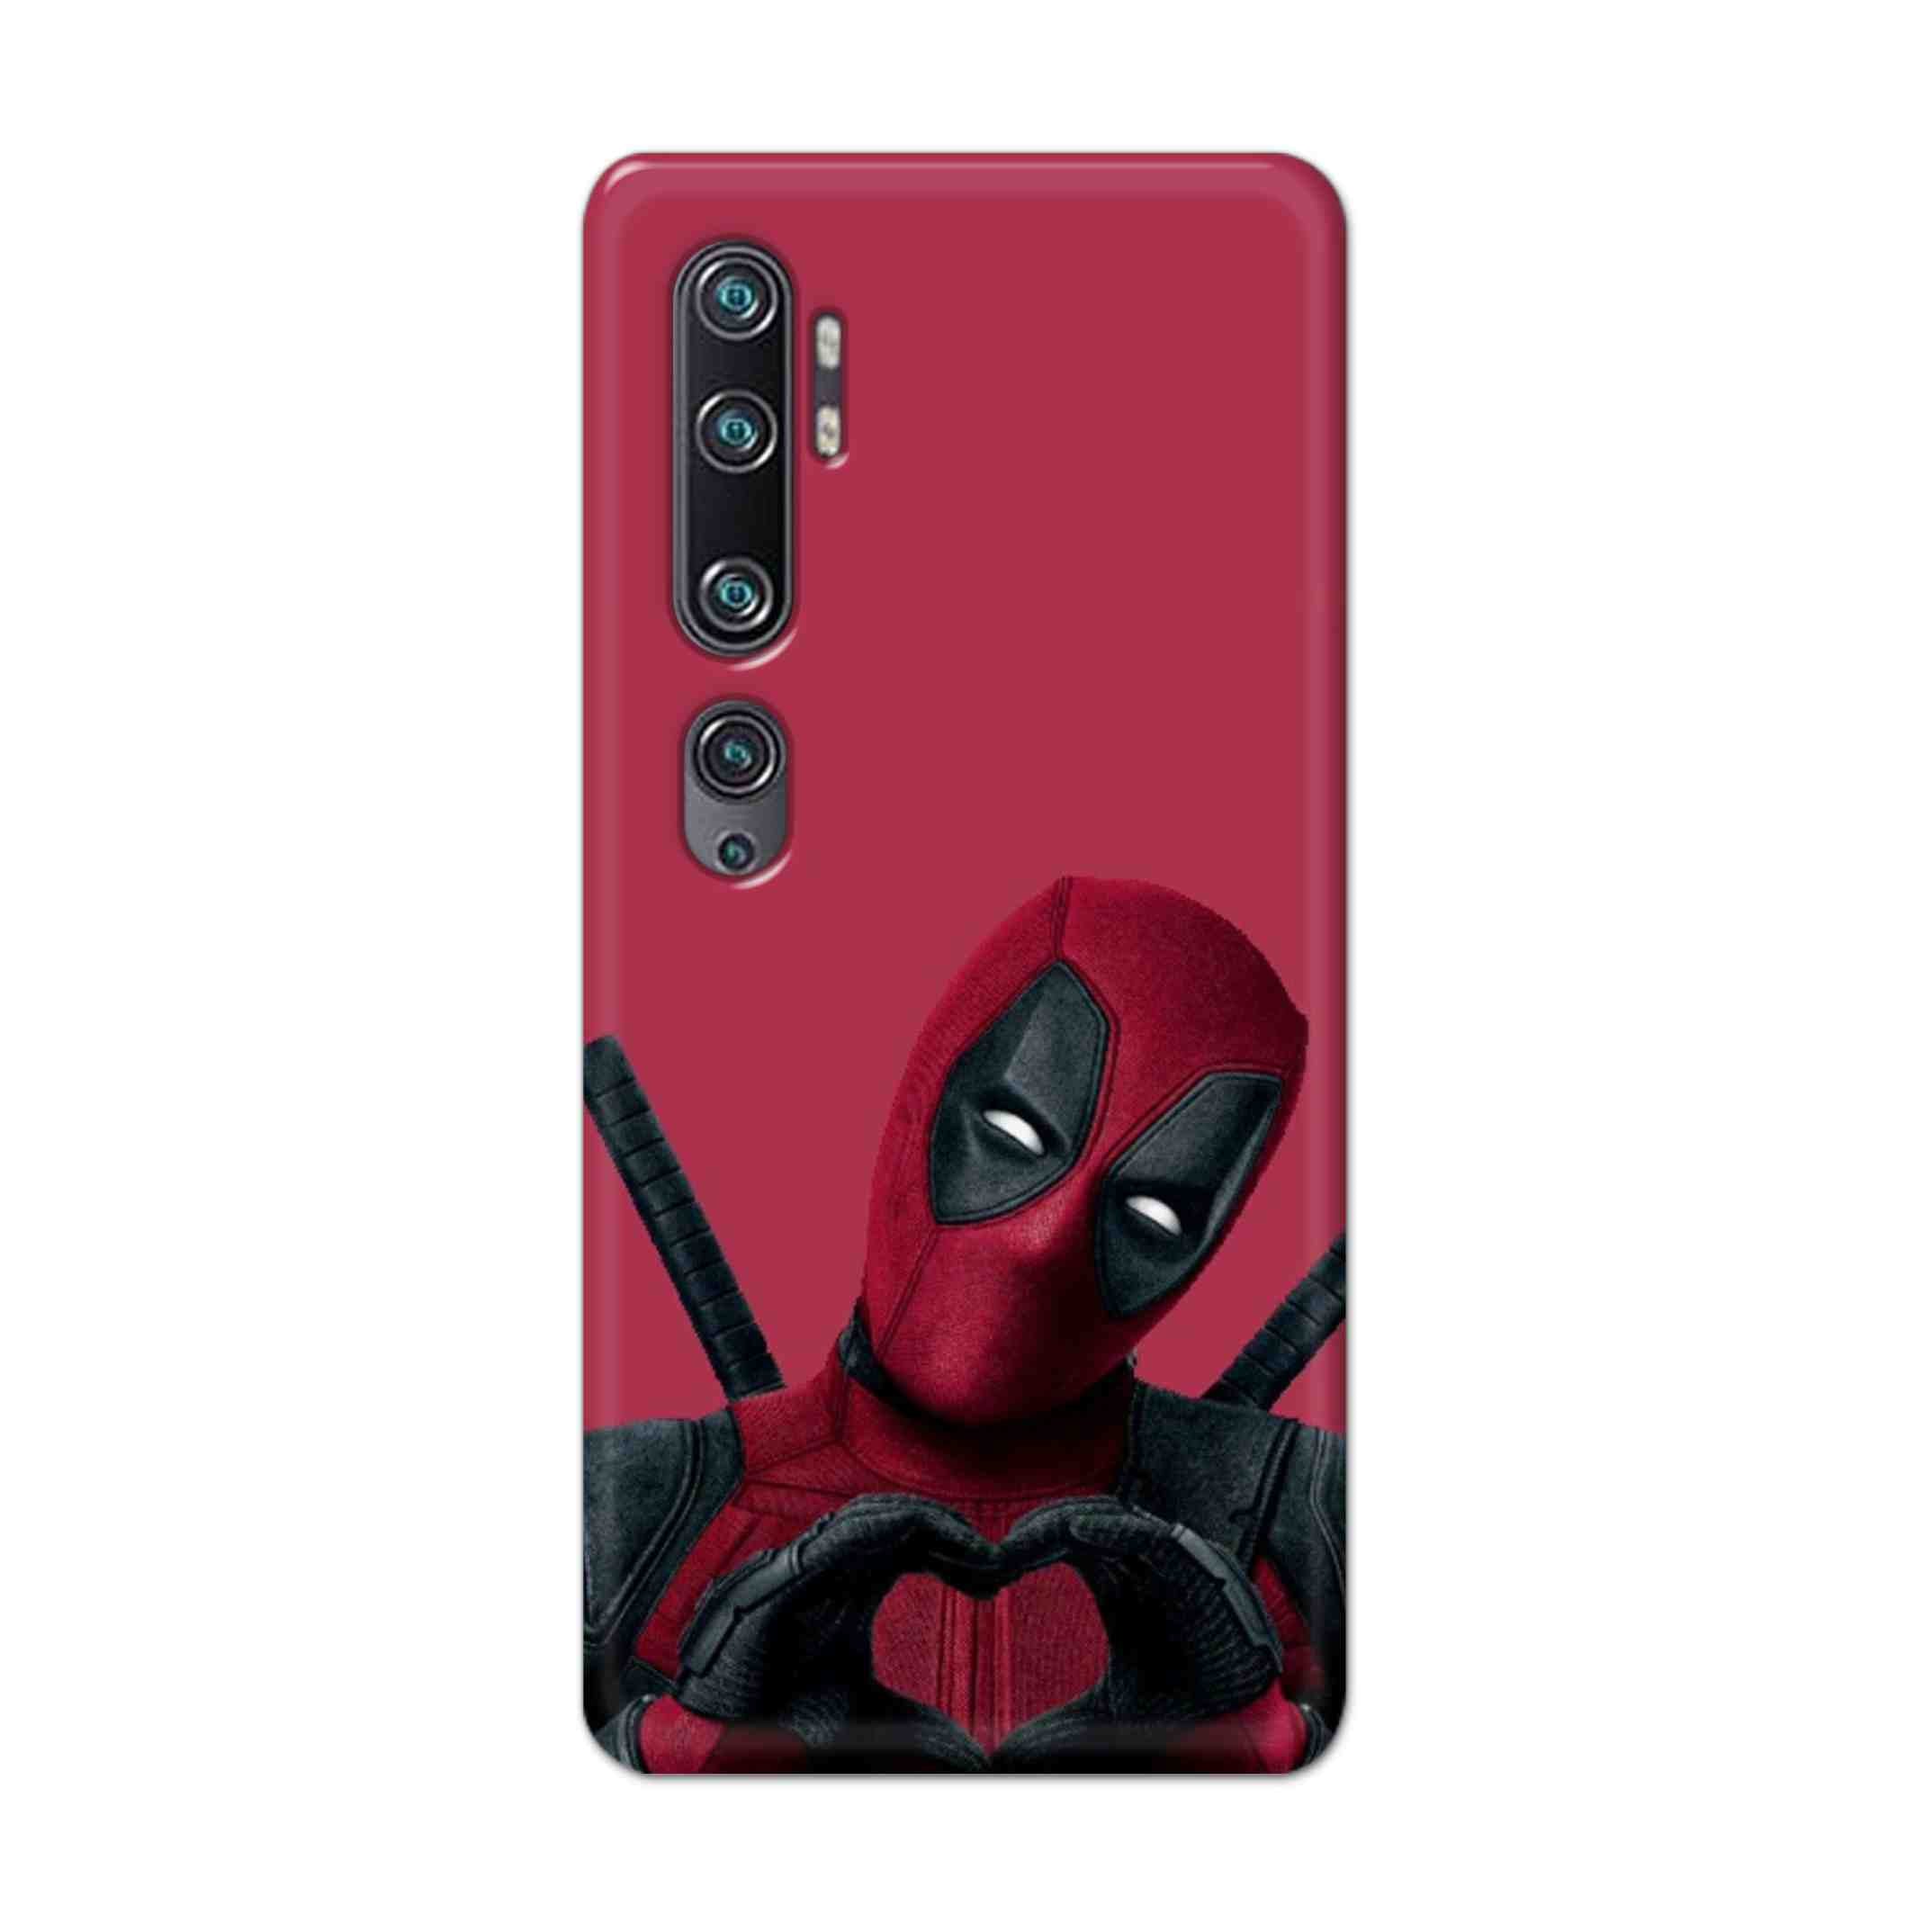 Buy Deadpool Heart Hard Back Mobile Phone Case Cover For Xiaomi Mi Note 10 Online